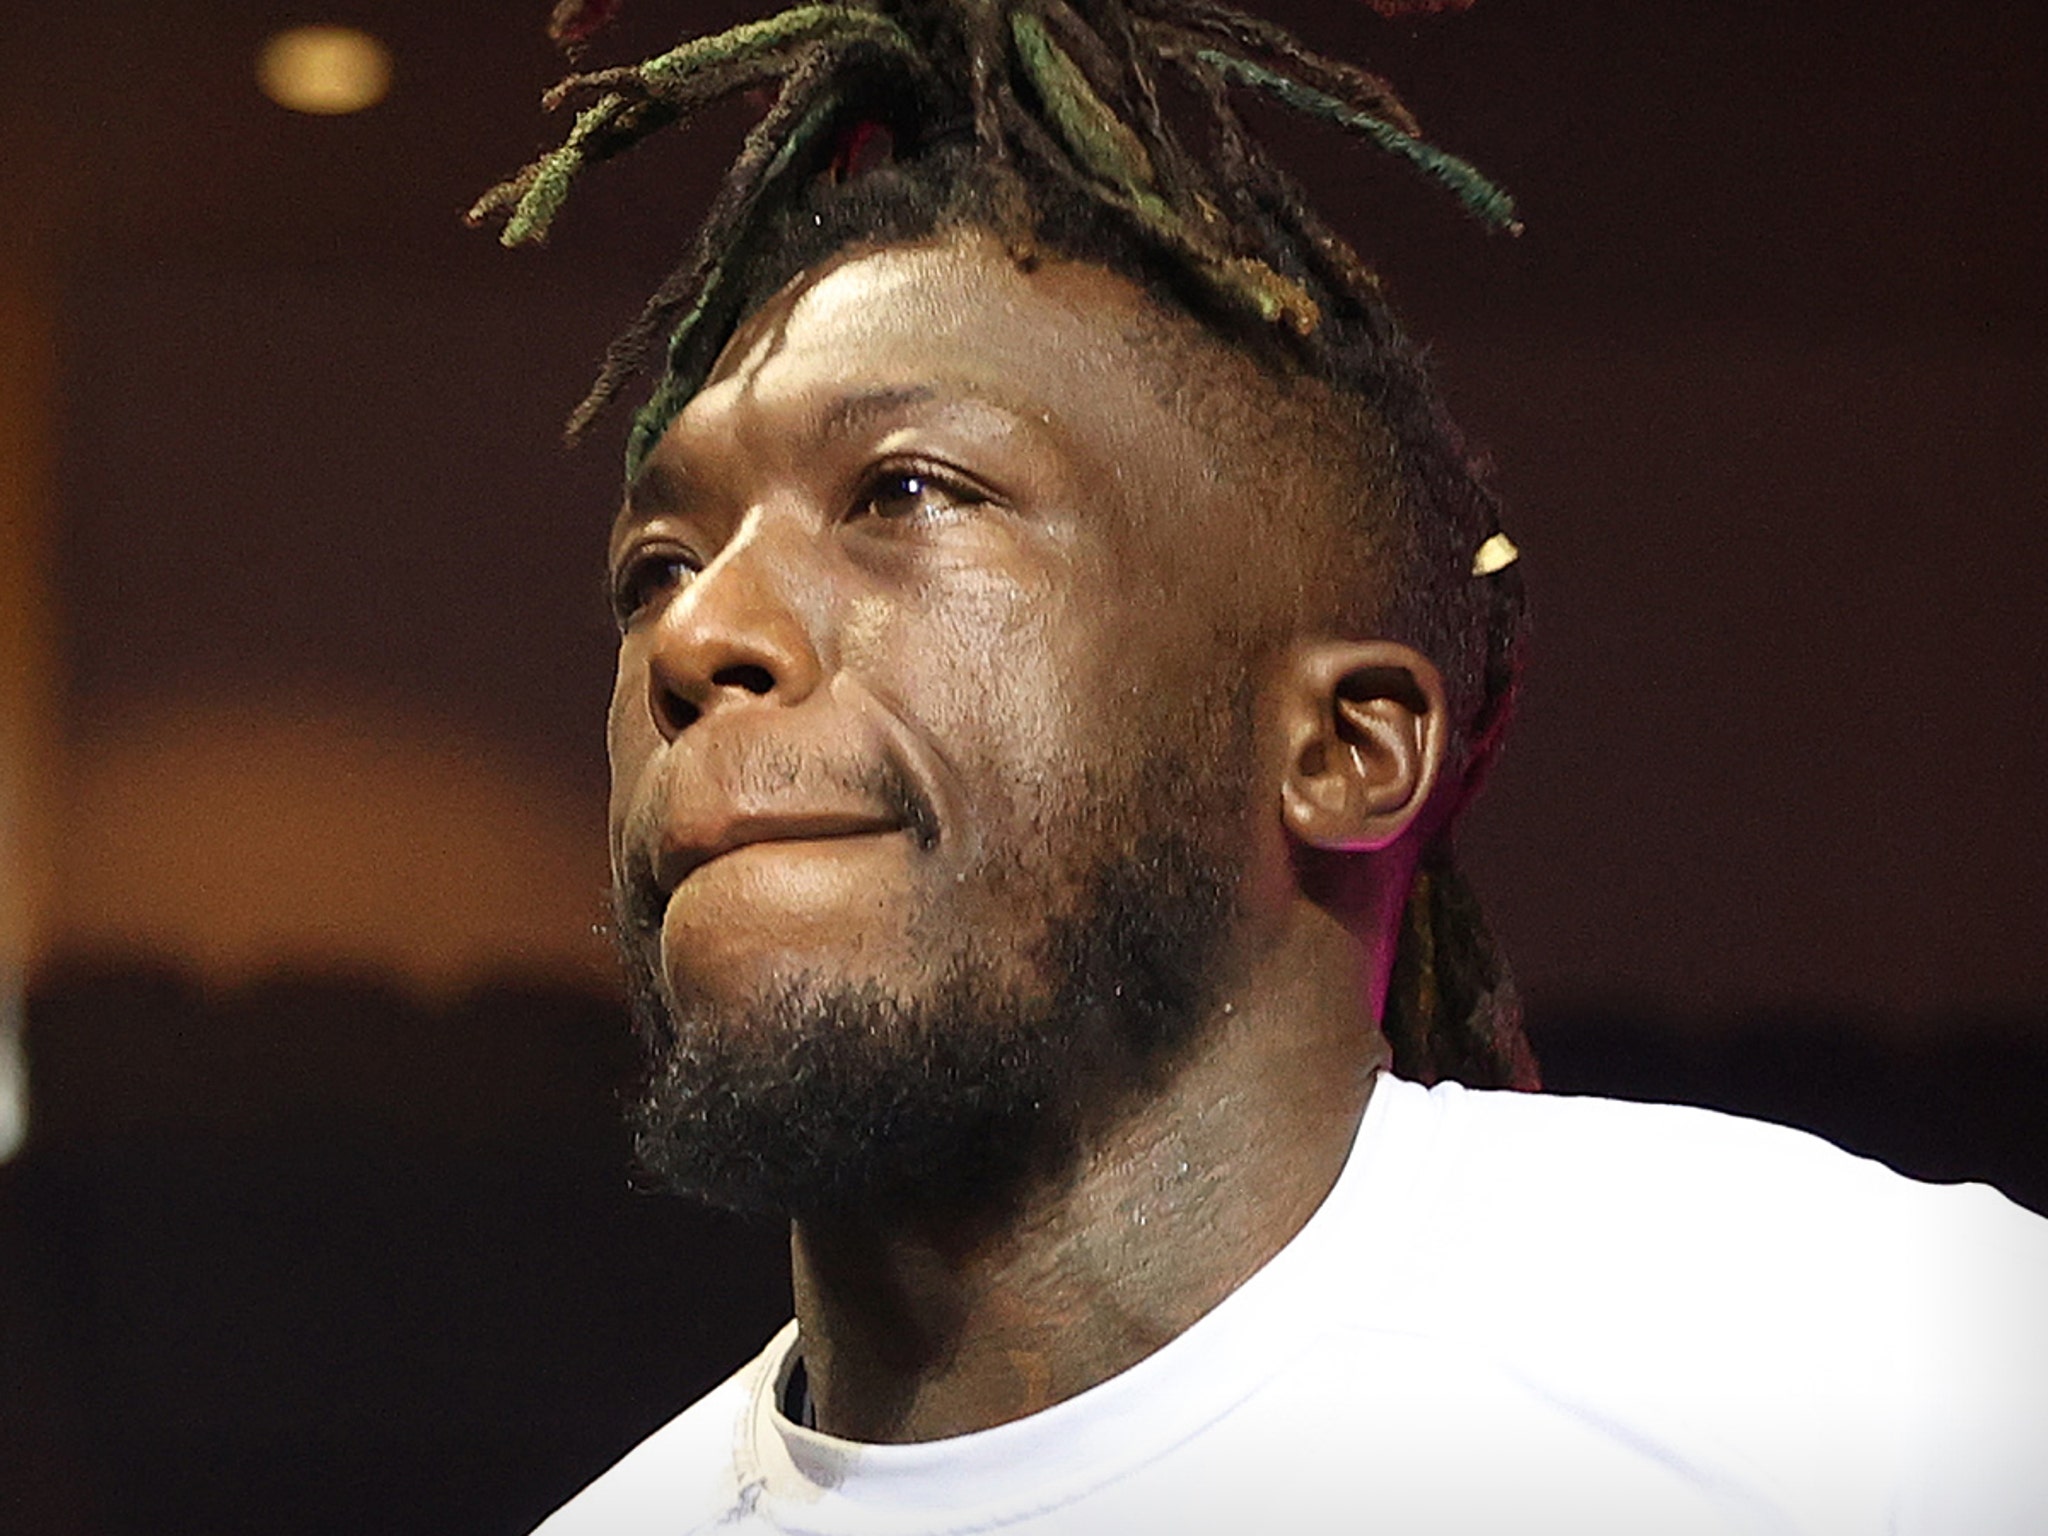 Nate Robinson is hoping BIG3 can revive his NBA career